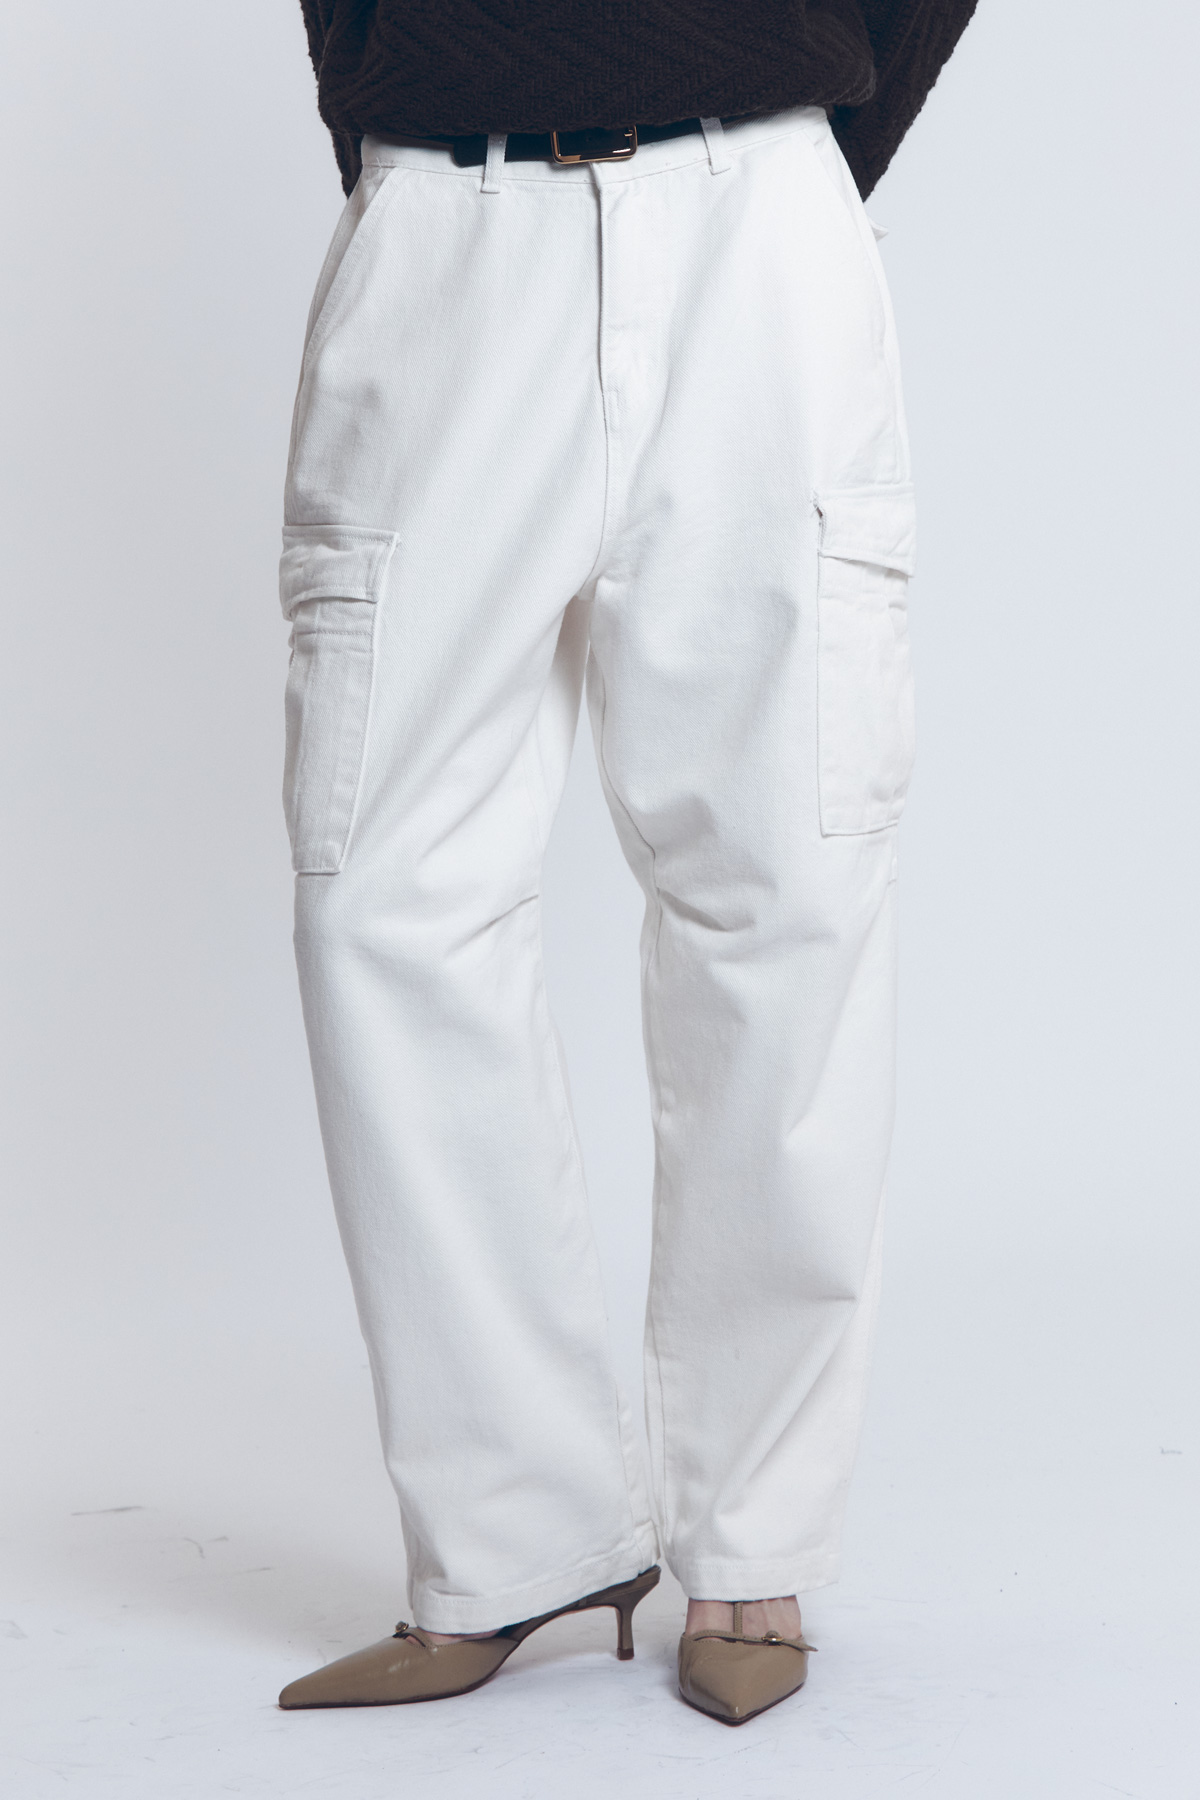 COTTON TWILL MILITARY WIDE CARGO PANTS (OFF WHITE)